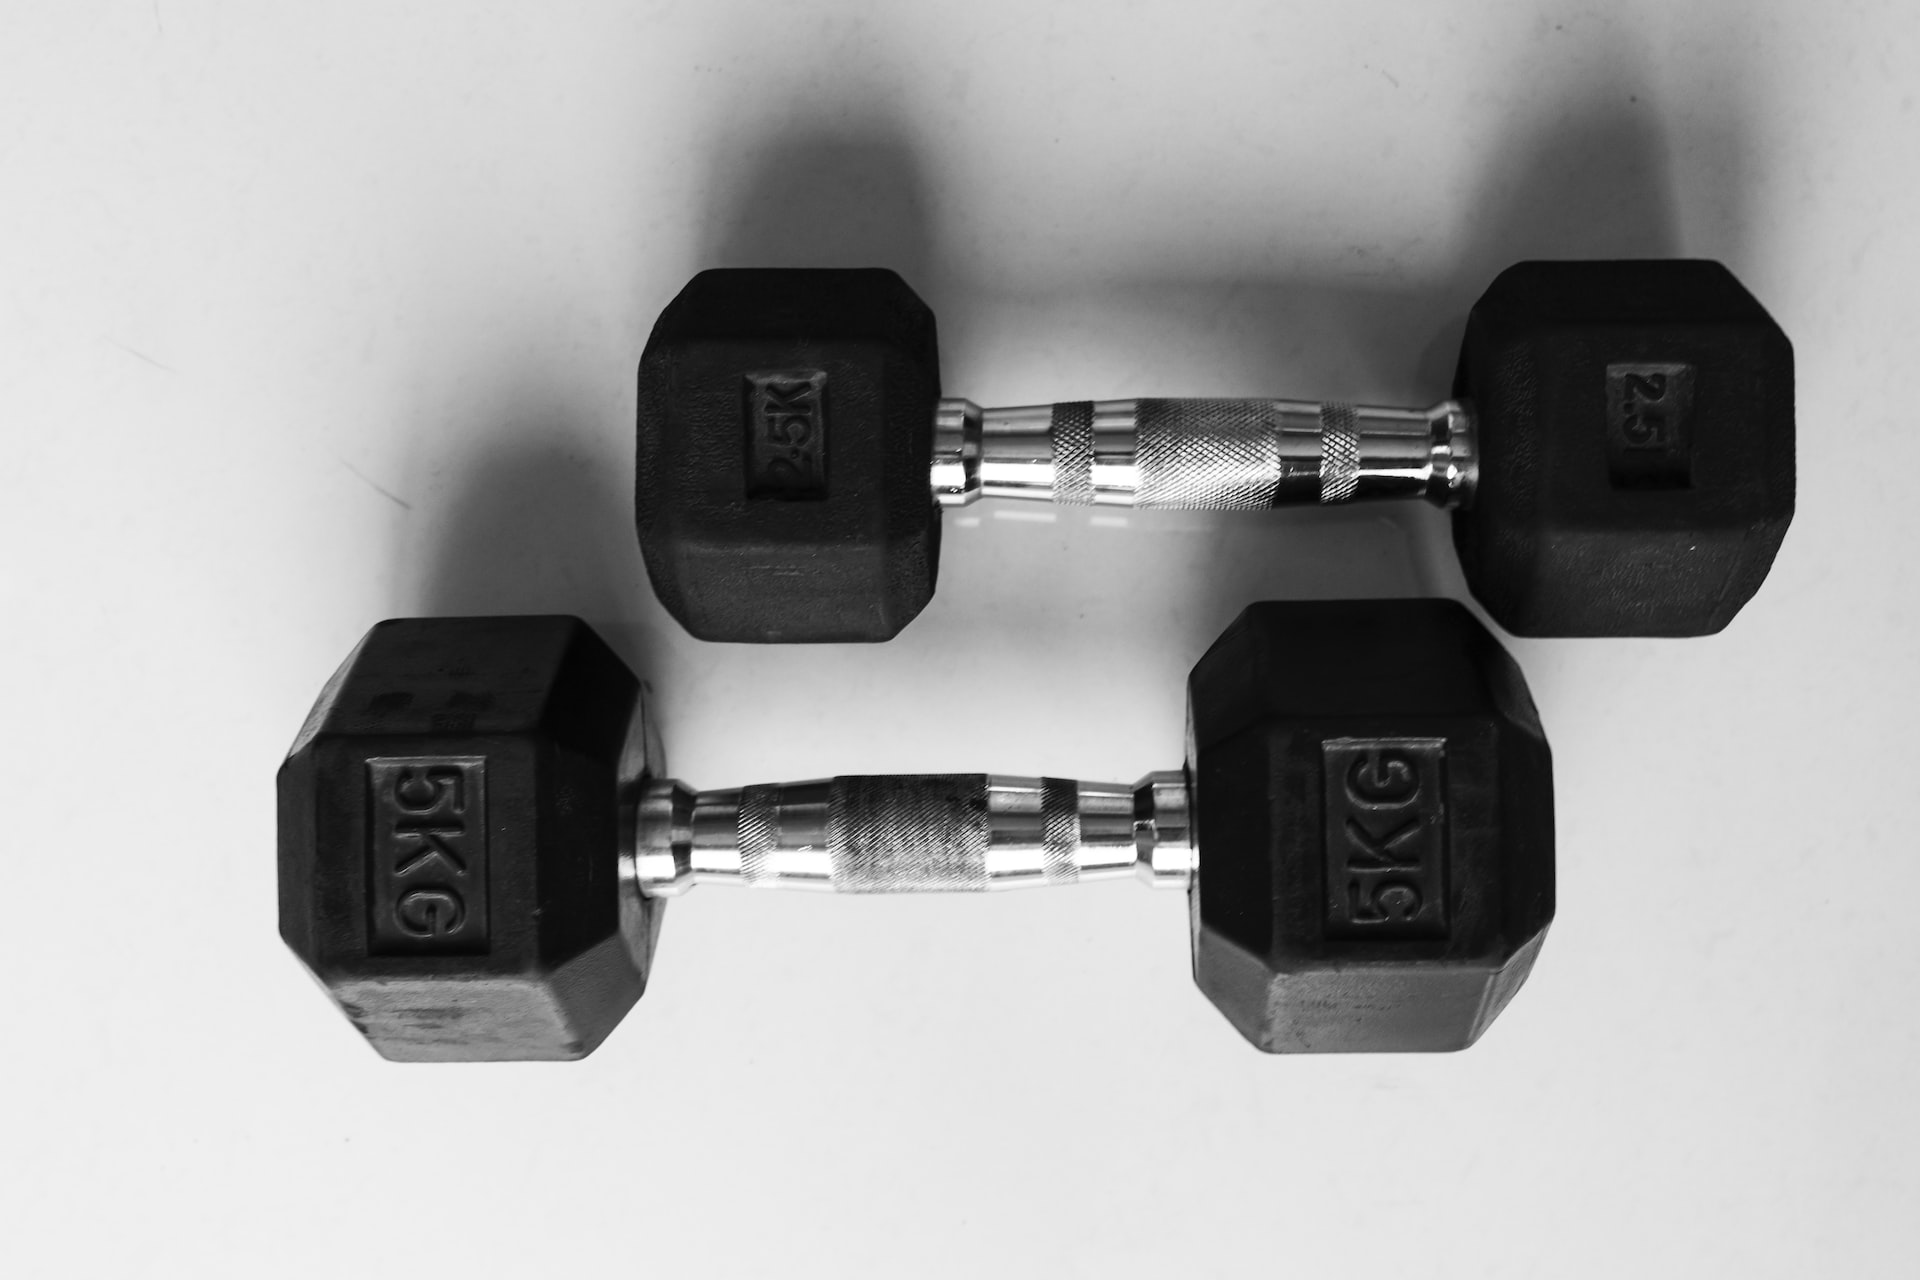 These Dumbbell Exercises You Can Do At Home